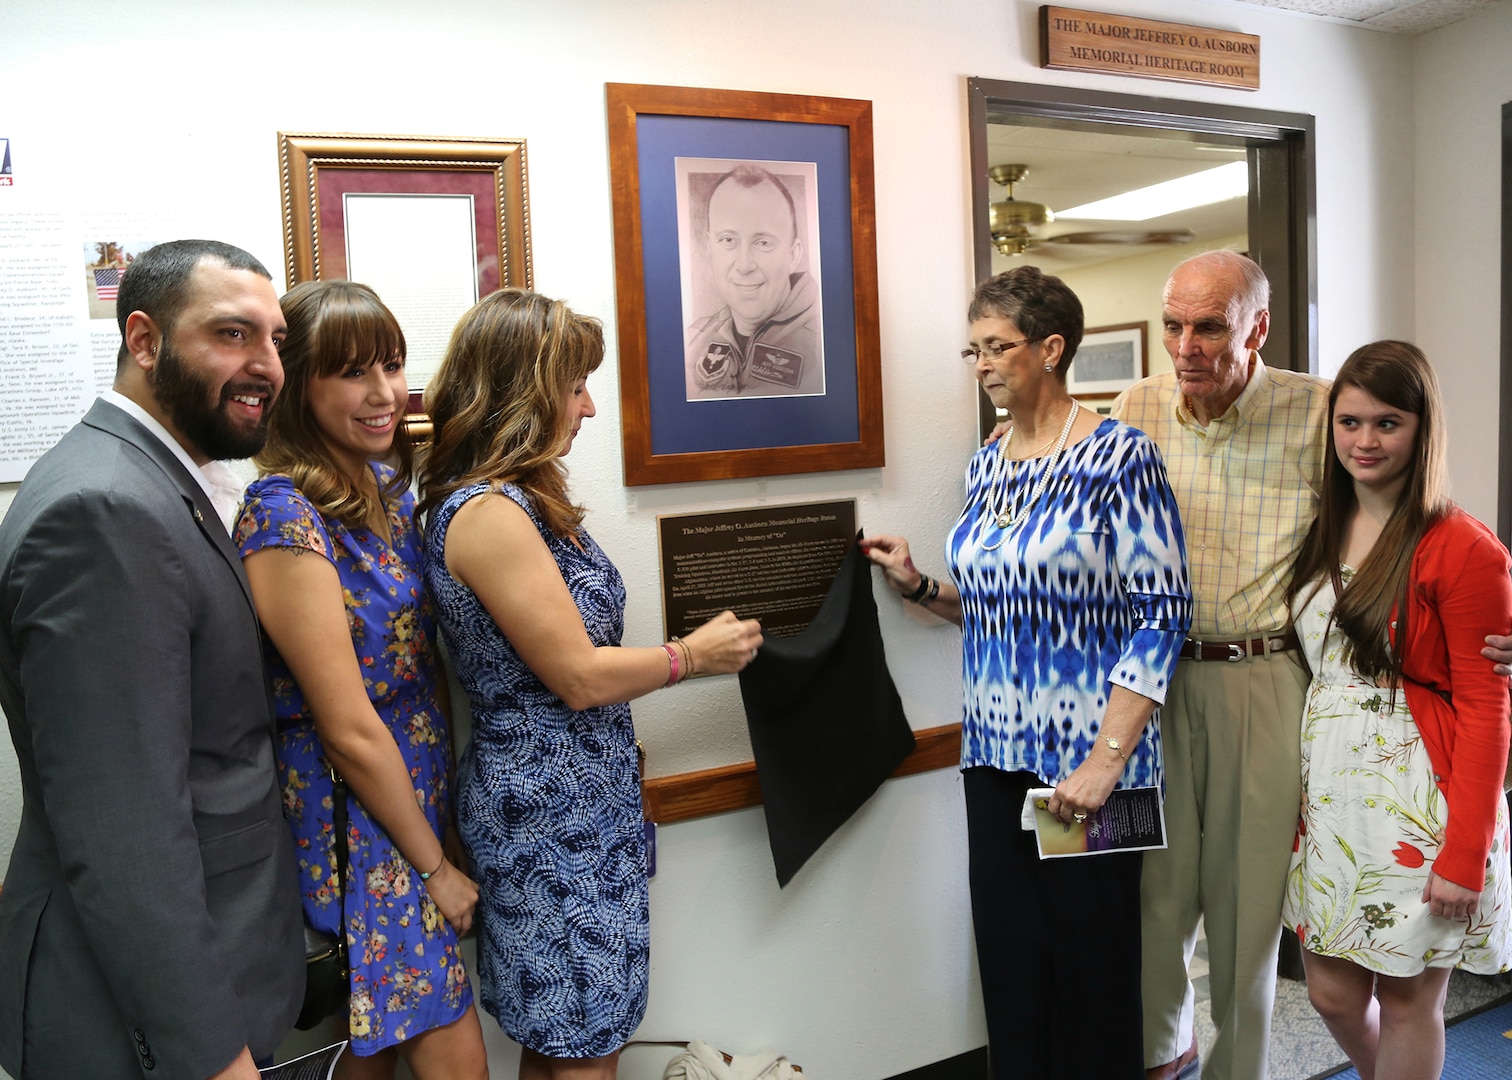 Family members of Maj. Jeff Ausborn unveil the Maj. Jeffrey Ausborn Memorial Heritage Room plaque April 18 at the 99th Flying Training Squadron at Joint Base San Antonio-Randolph.  Pictured (from left) are Mitchell Maloy, step-son, Summer Maloy, step-daughter, Suzanna Ausborn, widow, Faye and Clifford Ausborn, parents, and Emily Ausborn, daughter. Ausborn, 41, was deployed from JBSA-Randolph and killed April 27, 2011, in Kabul, Afghanistan, when a shooter opened fire at the Kabul International Airport killing eight Airmen and one American contractor.  Ausborn was deployed to the 438th Air Expeditionary Wing where he served as a C-27 instructor pilot to new Afghan pilots. (U.S. Air Force photo by Melissa Peterson)